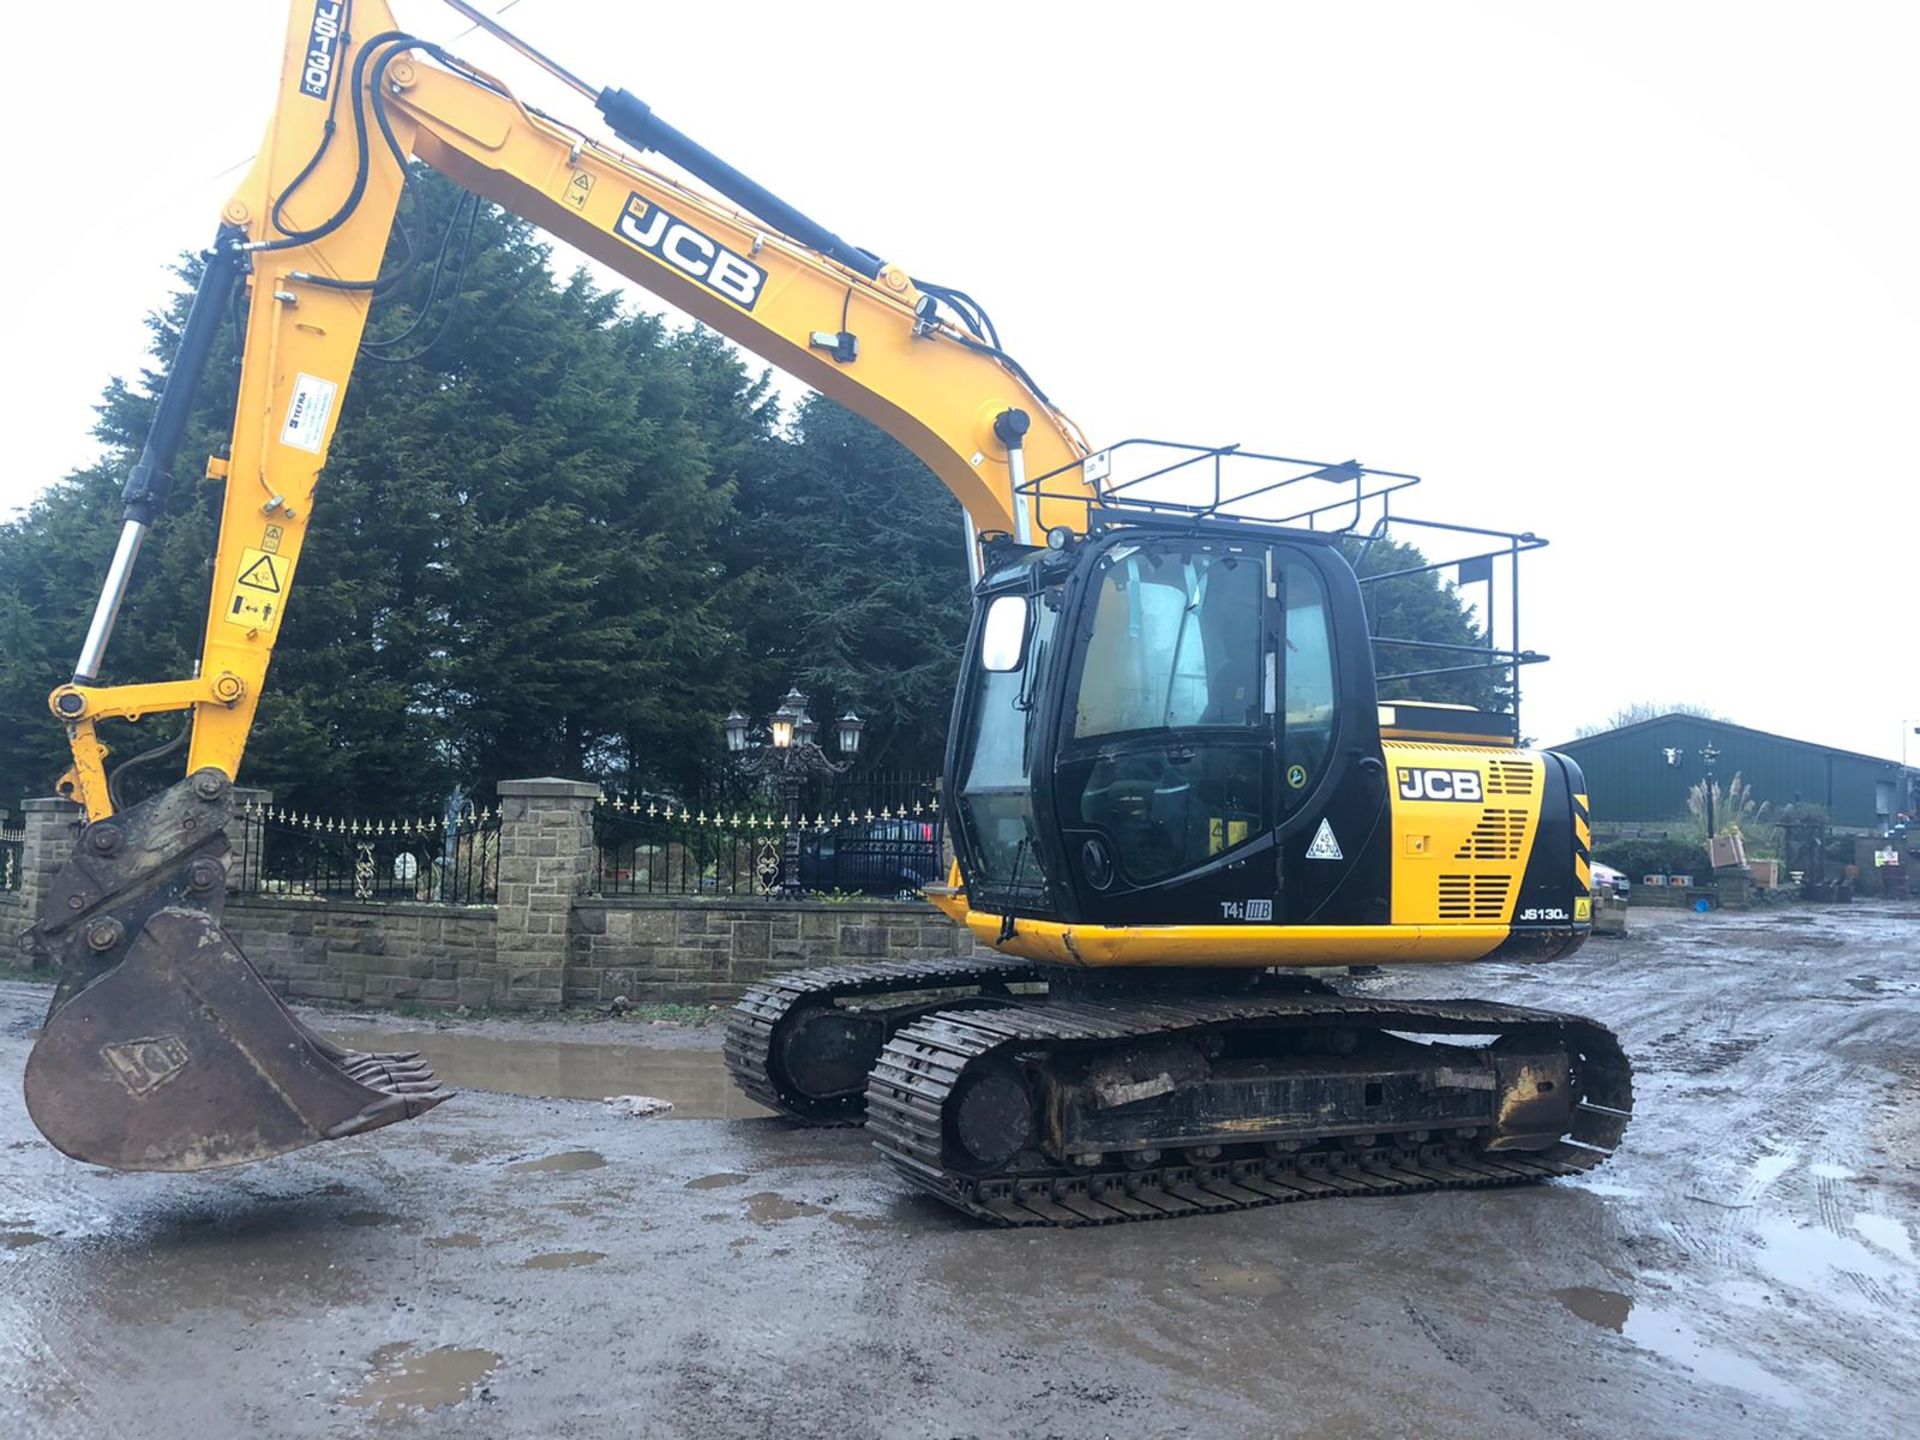 2015 JCB JS130LC 13 TON TRACKED CRAWLER EXCAVATOR / DIGGER, IN VERY GOOD CONDITION, LOW HOURS 4620!